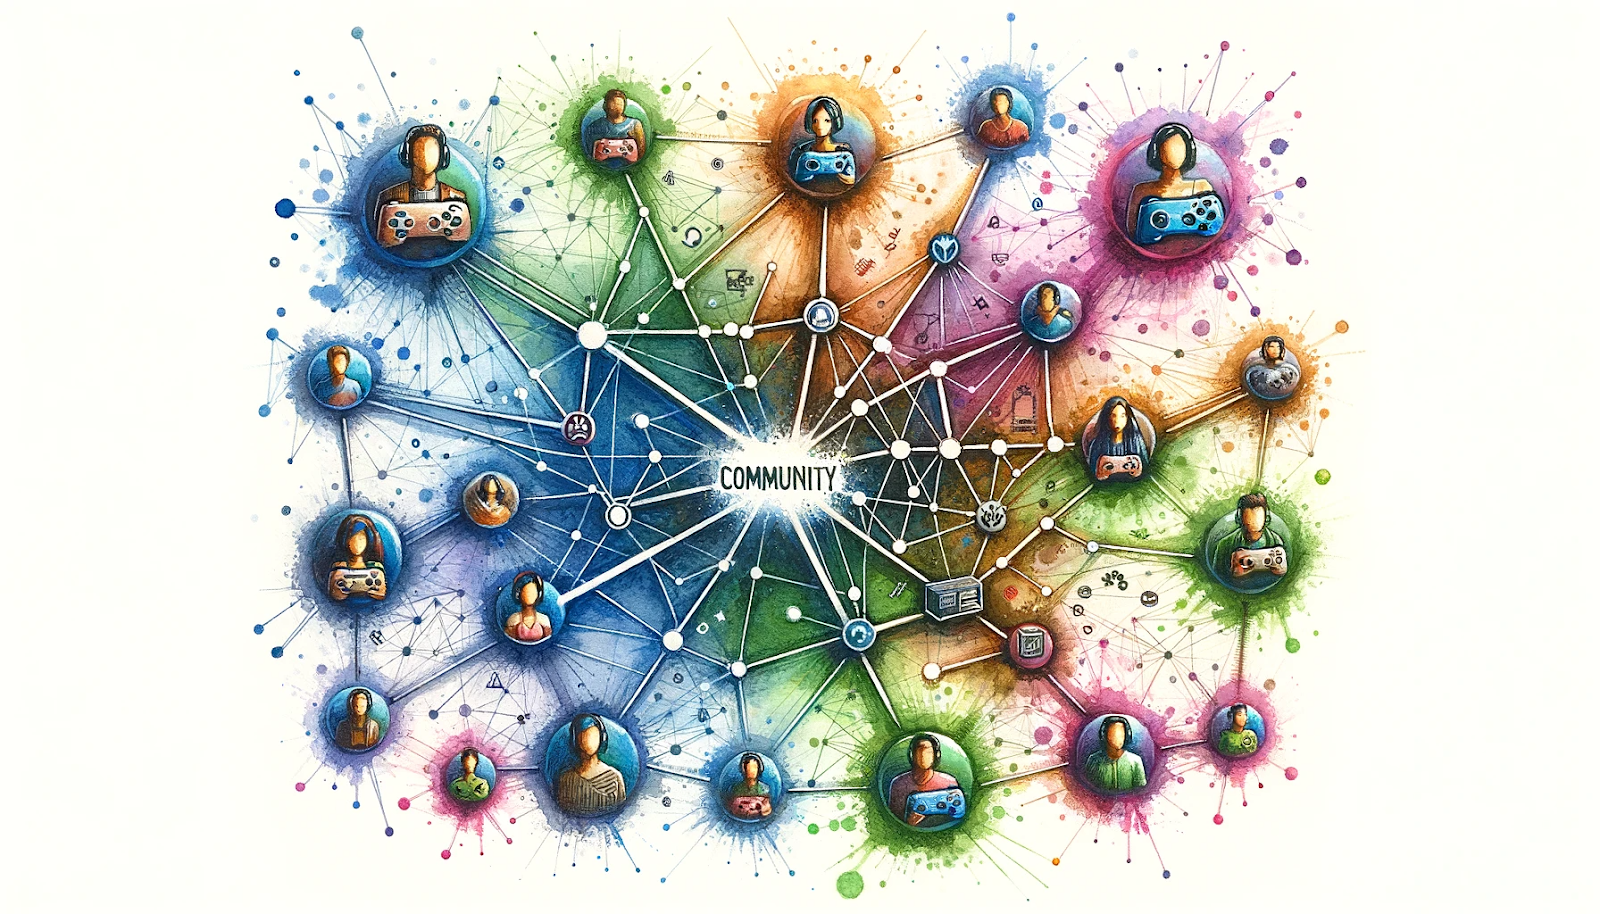 a network diagram illustrating partnerships between a gaming community, influencers, and other brands. It features interconnected lines and nodes with the gaming community at the center, surrounded by influencers and various brands.